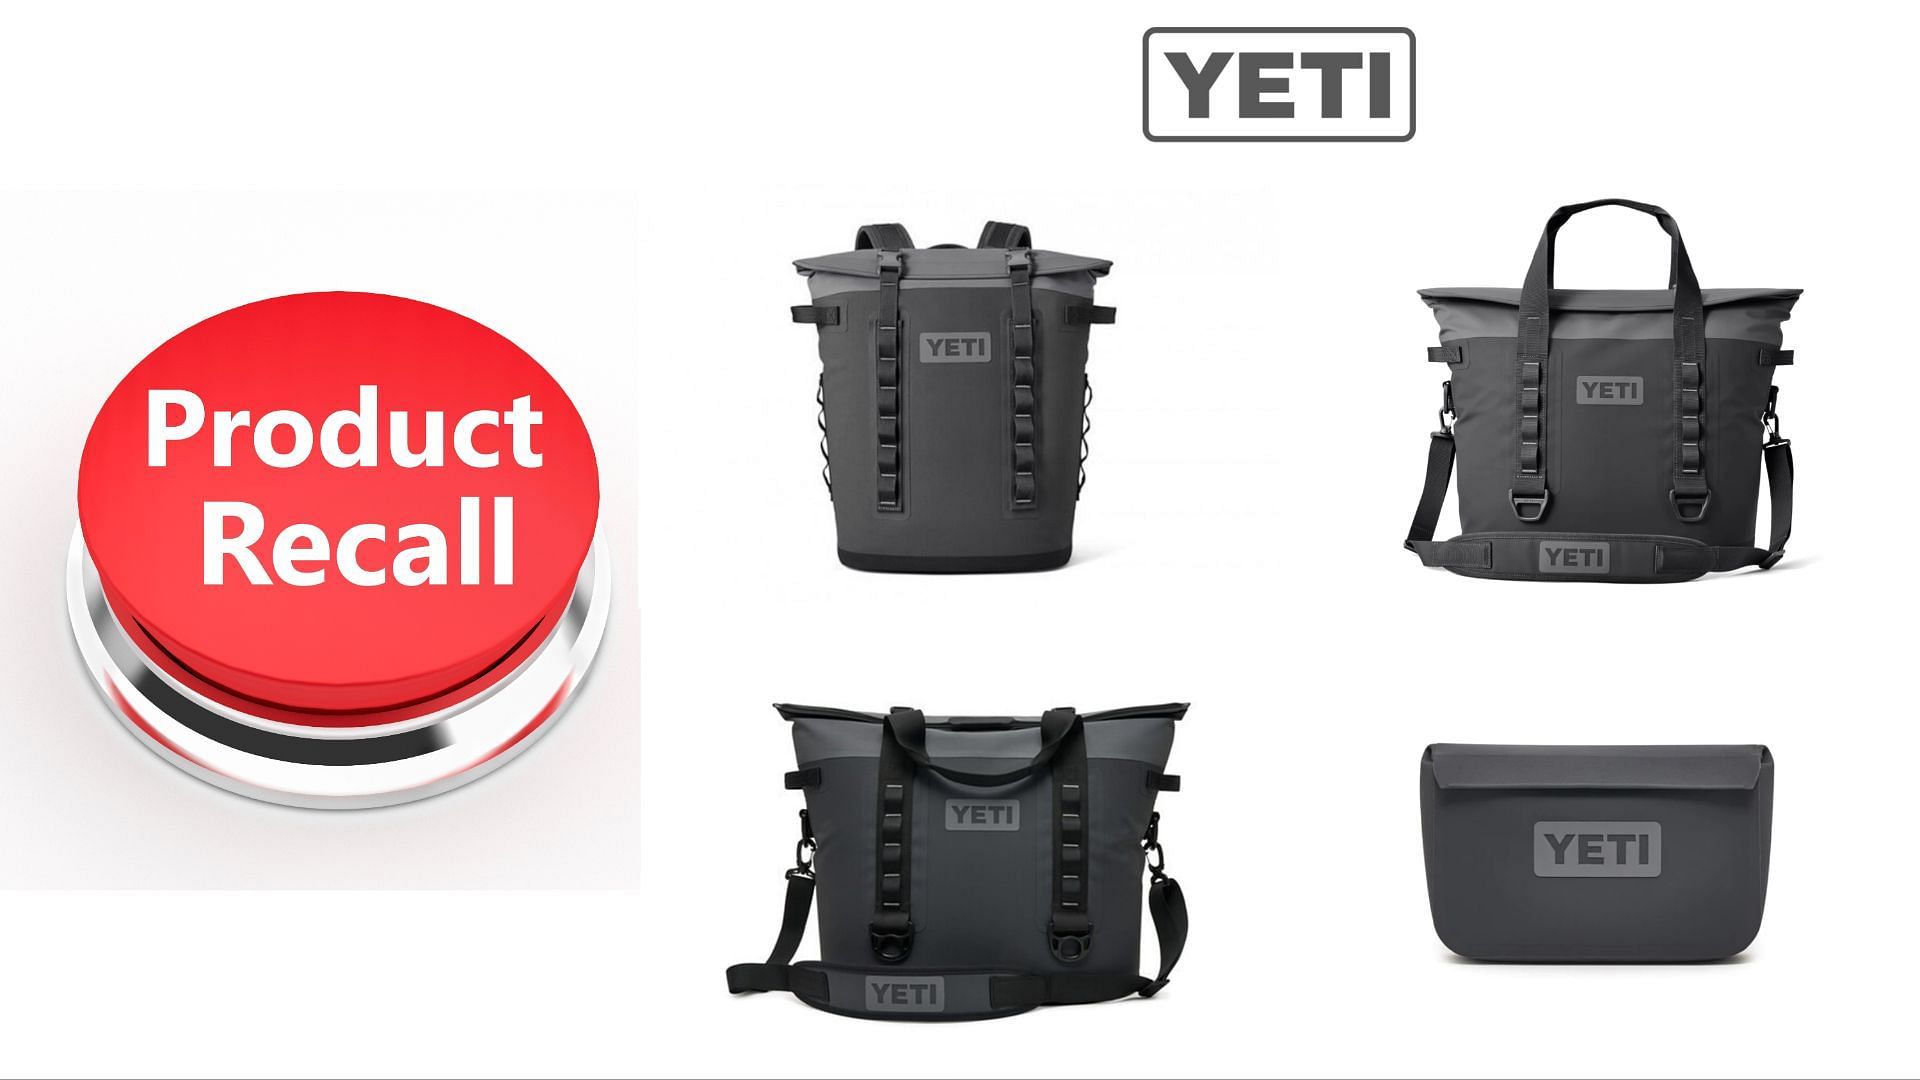 Yeti Sidekick recall List of products and all you need to know